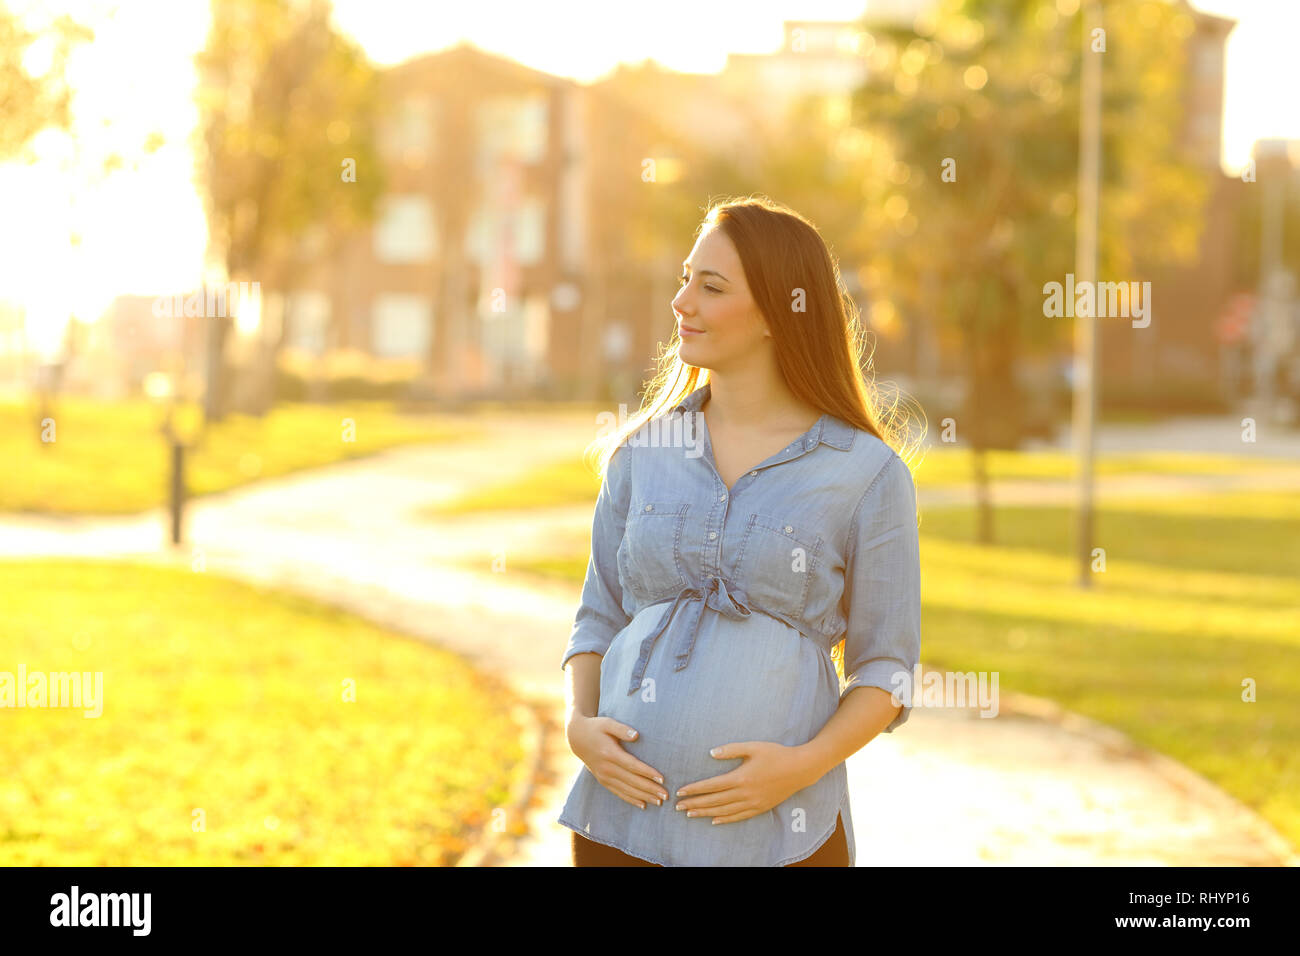 Portrait of a pregnant woman walking towards camera looking at side in a park at sunset Stock Photo